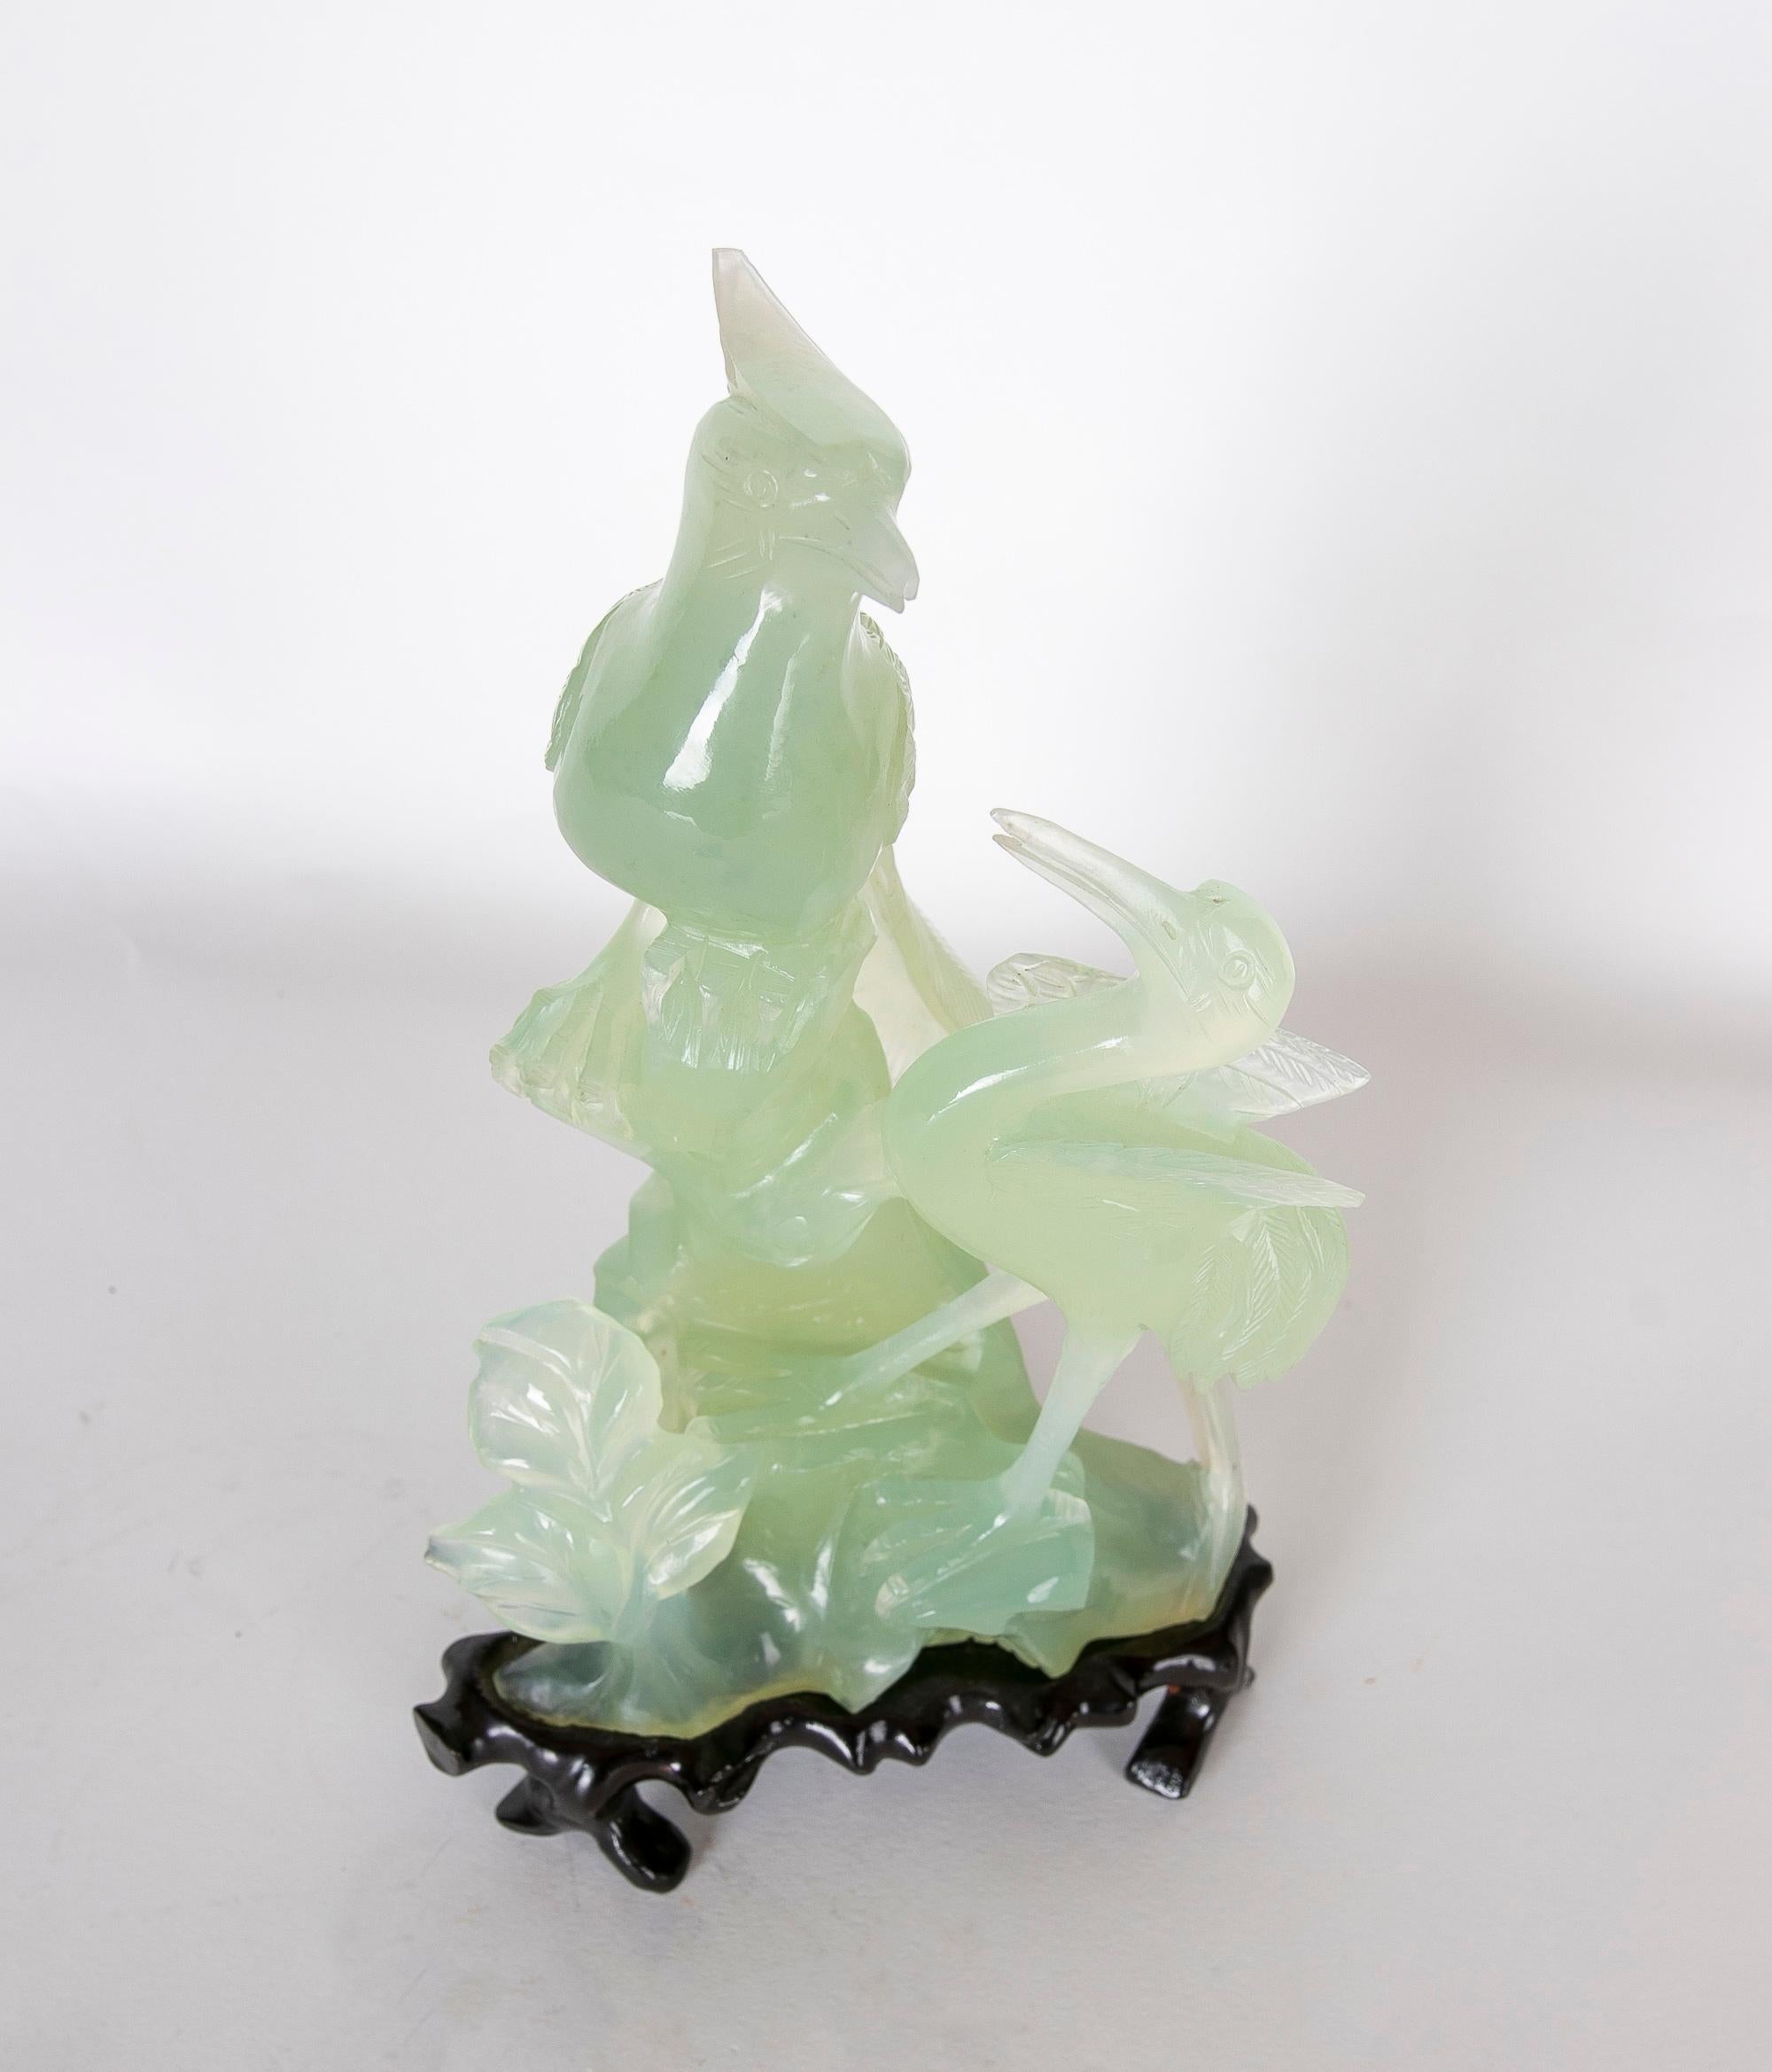 Hand-Carved Bird Jadeite Sculpture with Flowers and Wooden Base For Sale 2